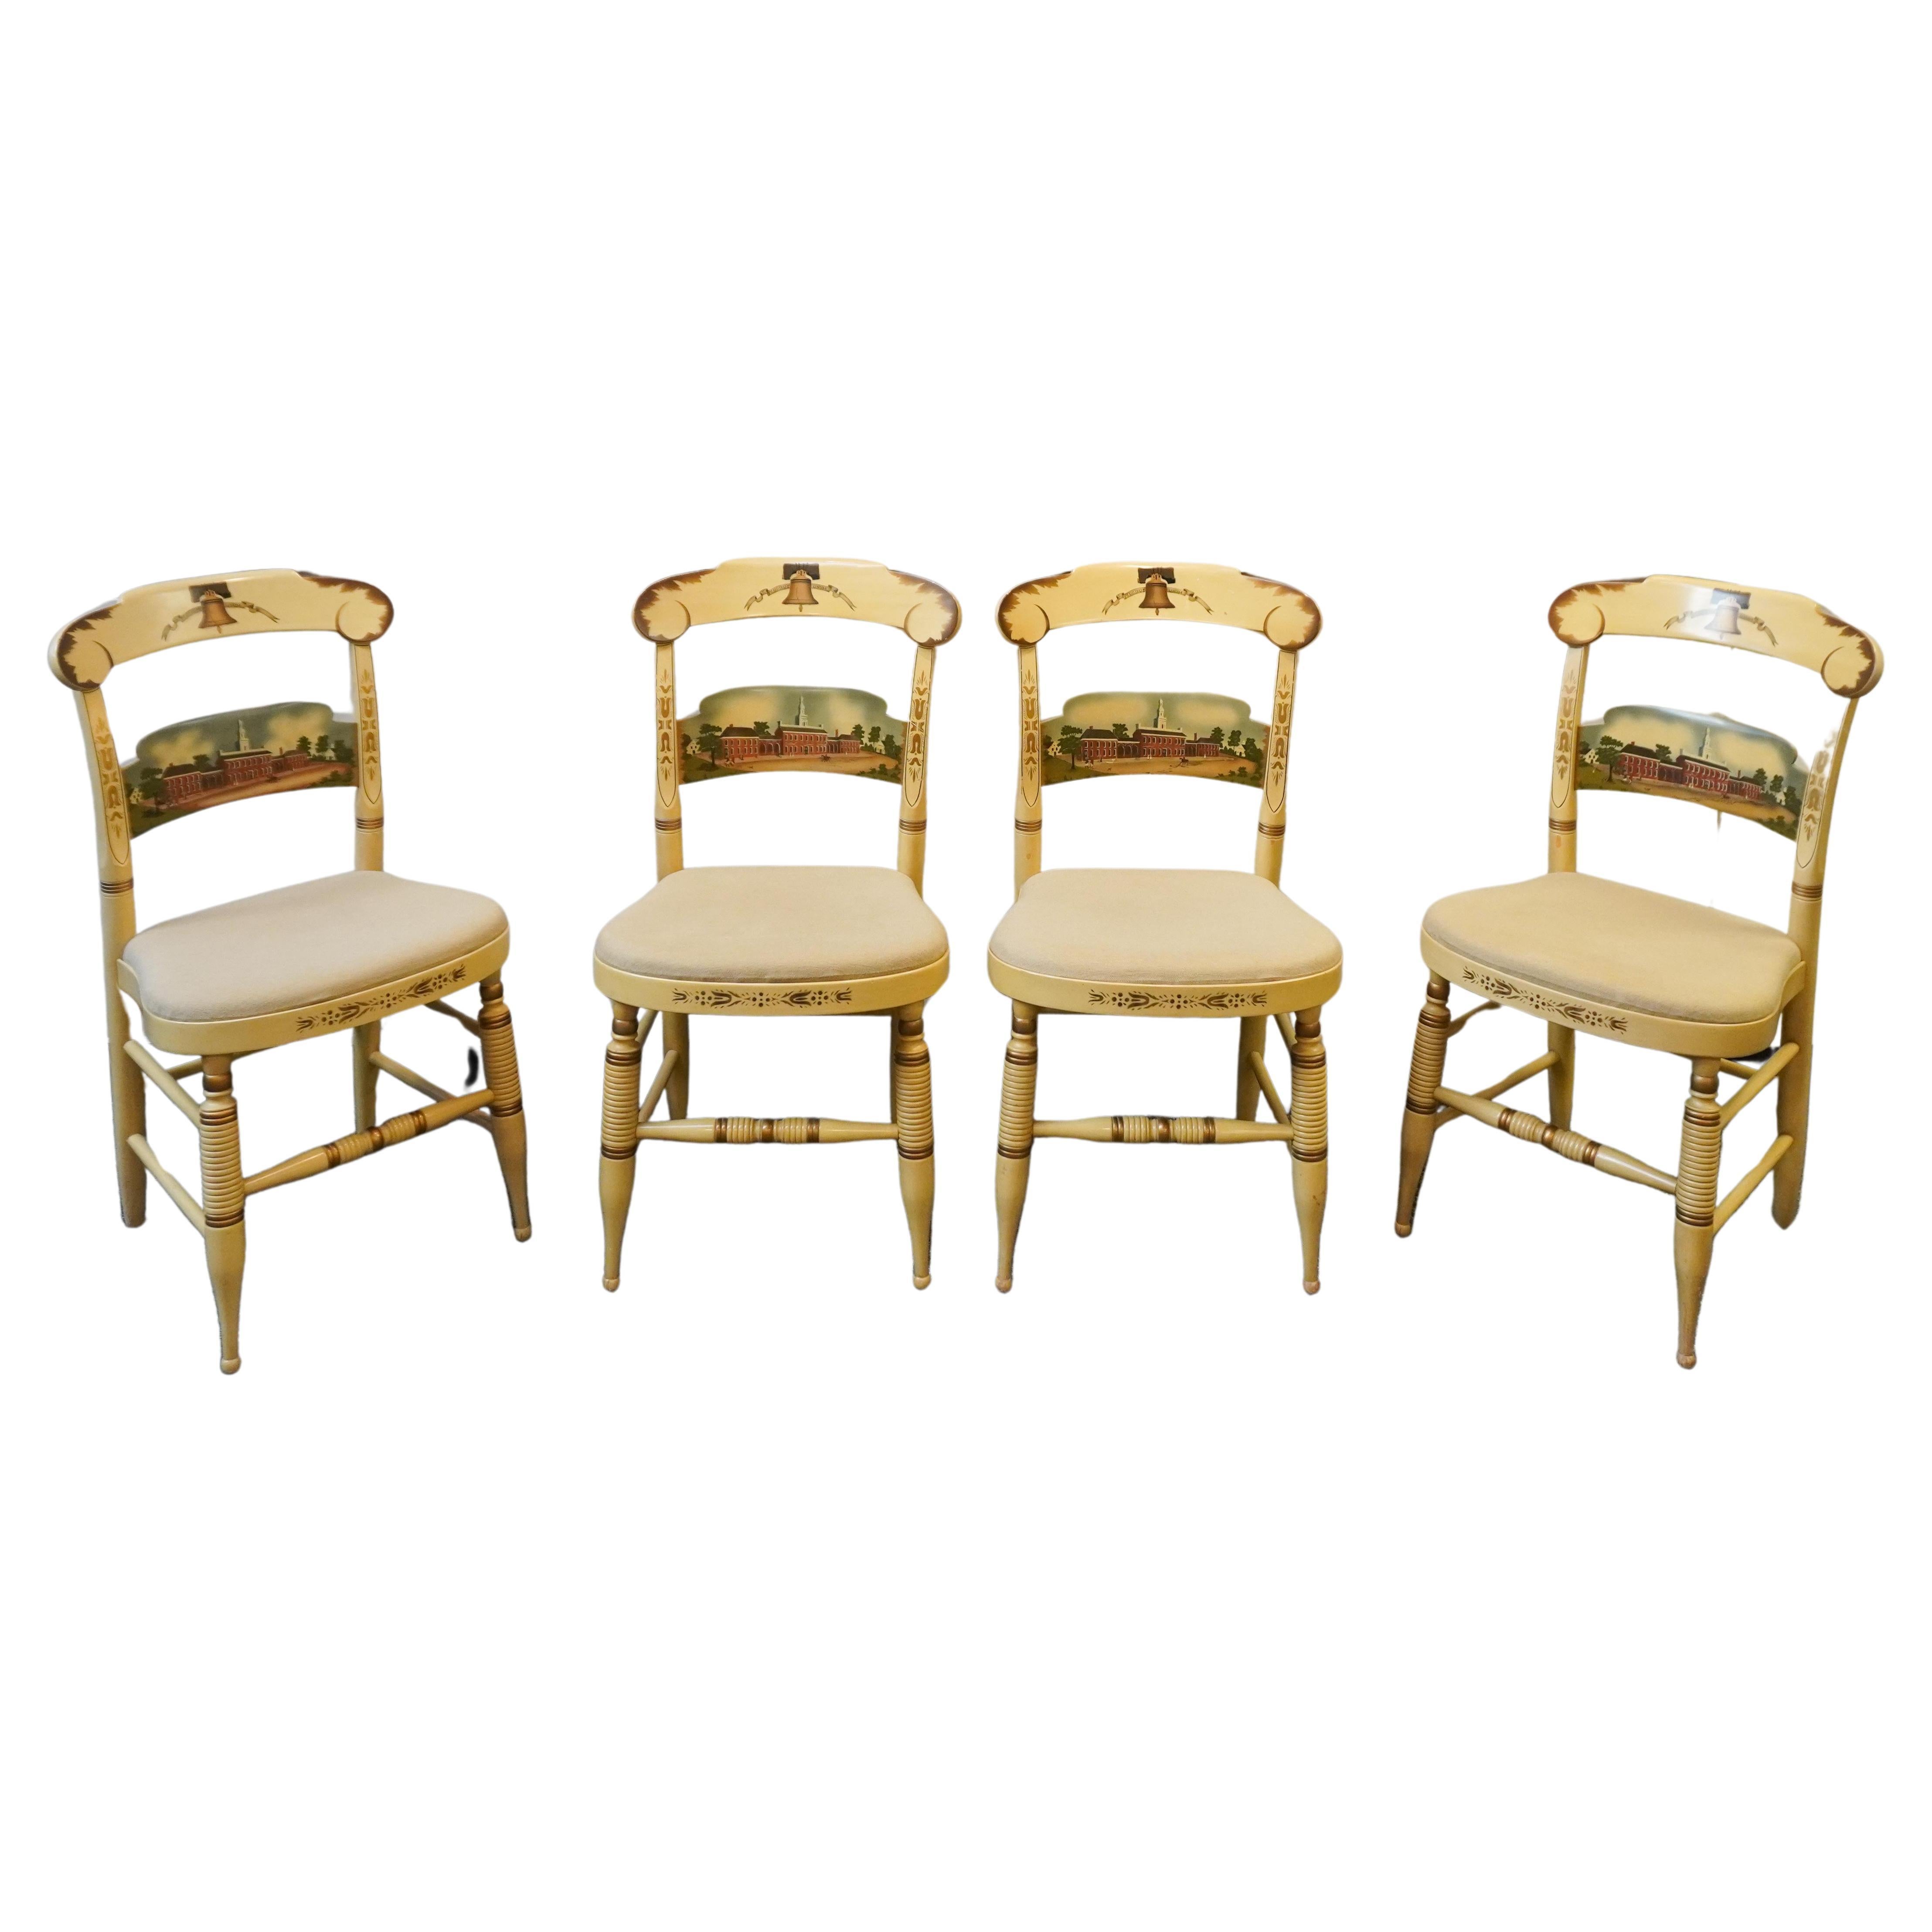 Set 4 Hitchcock For Strawbridge & Clothier 'The Independence Chairs" Ltd Edition For Sale